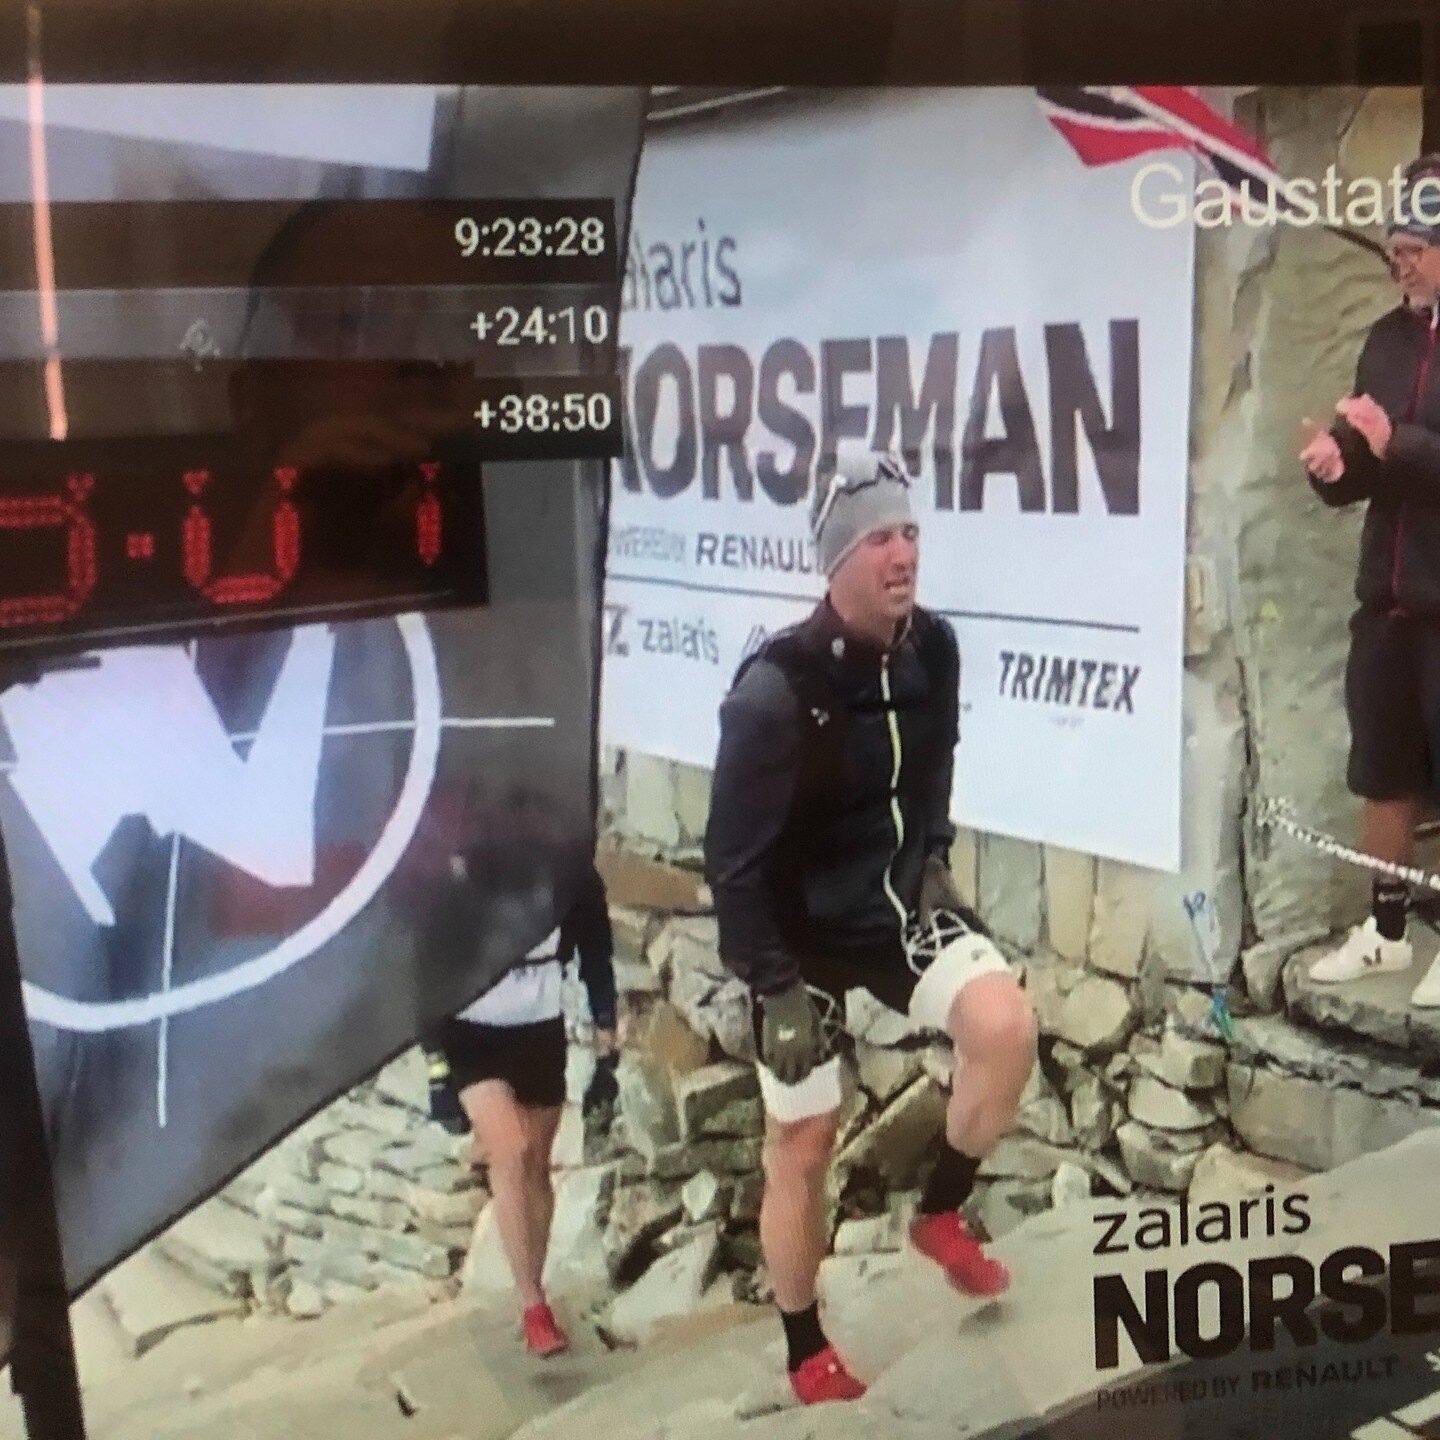 Huge congrats to Vmax Squad @sbradley11 Scott Bradley for completing the iron-distance Norseman XTreme Triathlon in Norway today and earning the coveted Black Finishers T-Shirt atop Gaustatoppen! A massive achievement three years in the waiting, fini